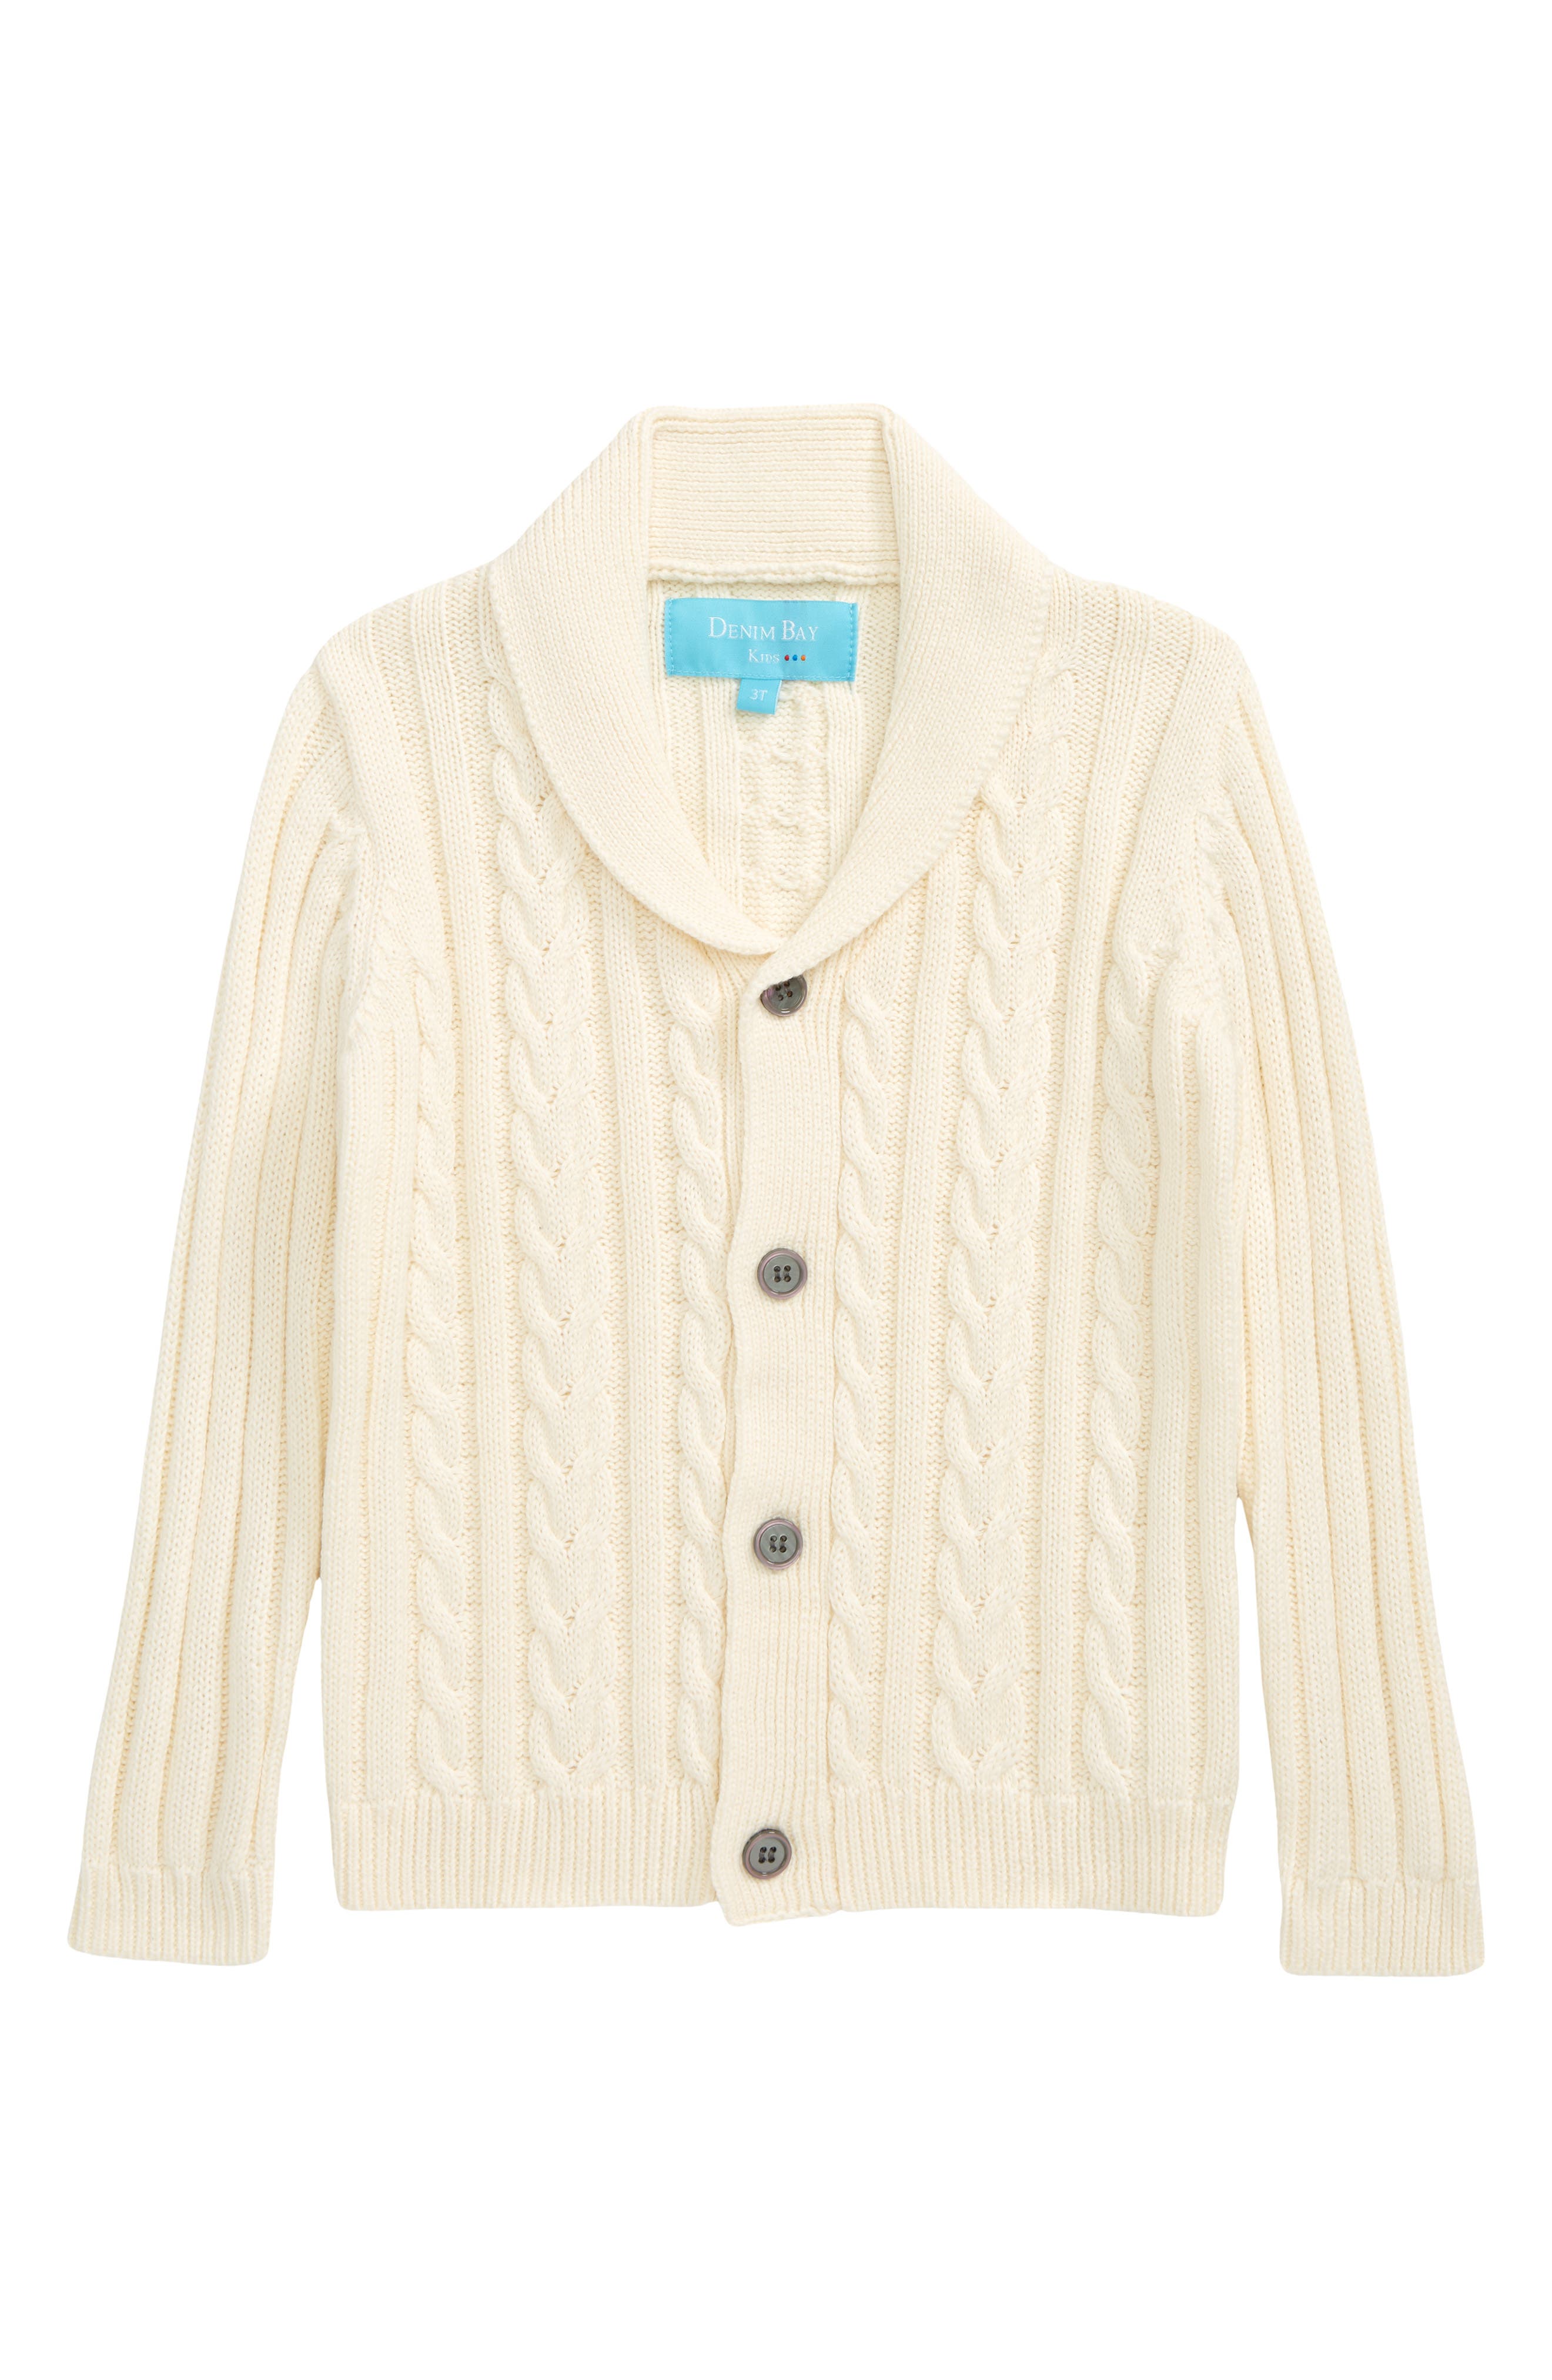 DAIMIDY Boy's Cable Knit Chunky Cardigan Sweater 2-10 Years 